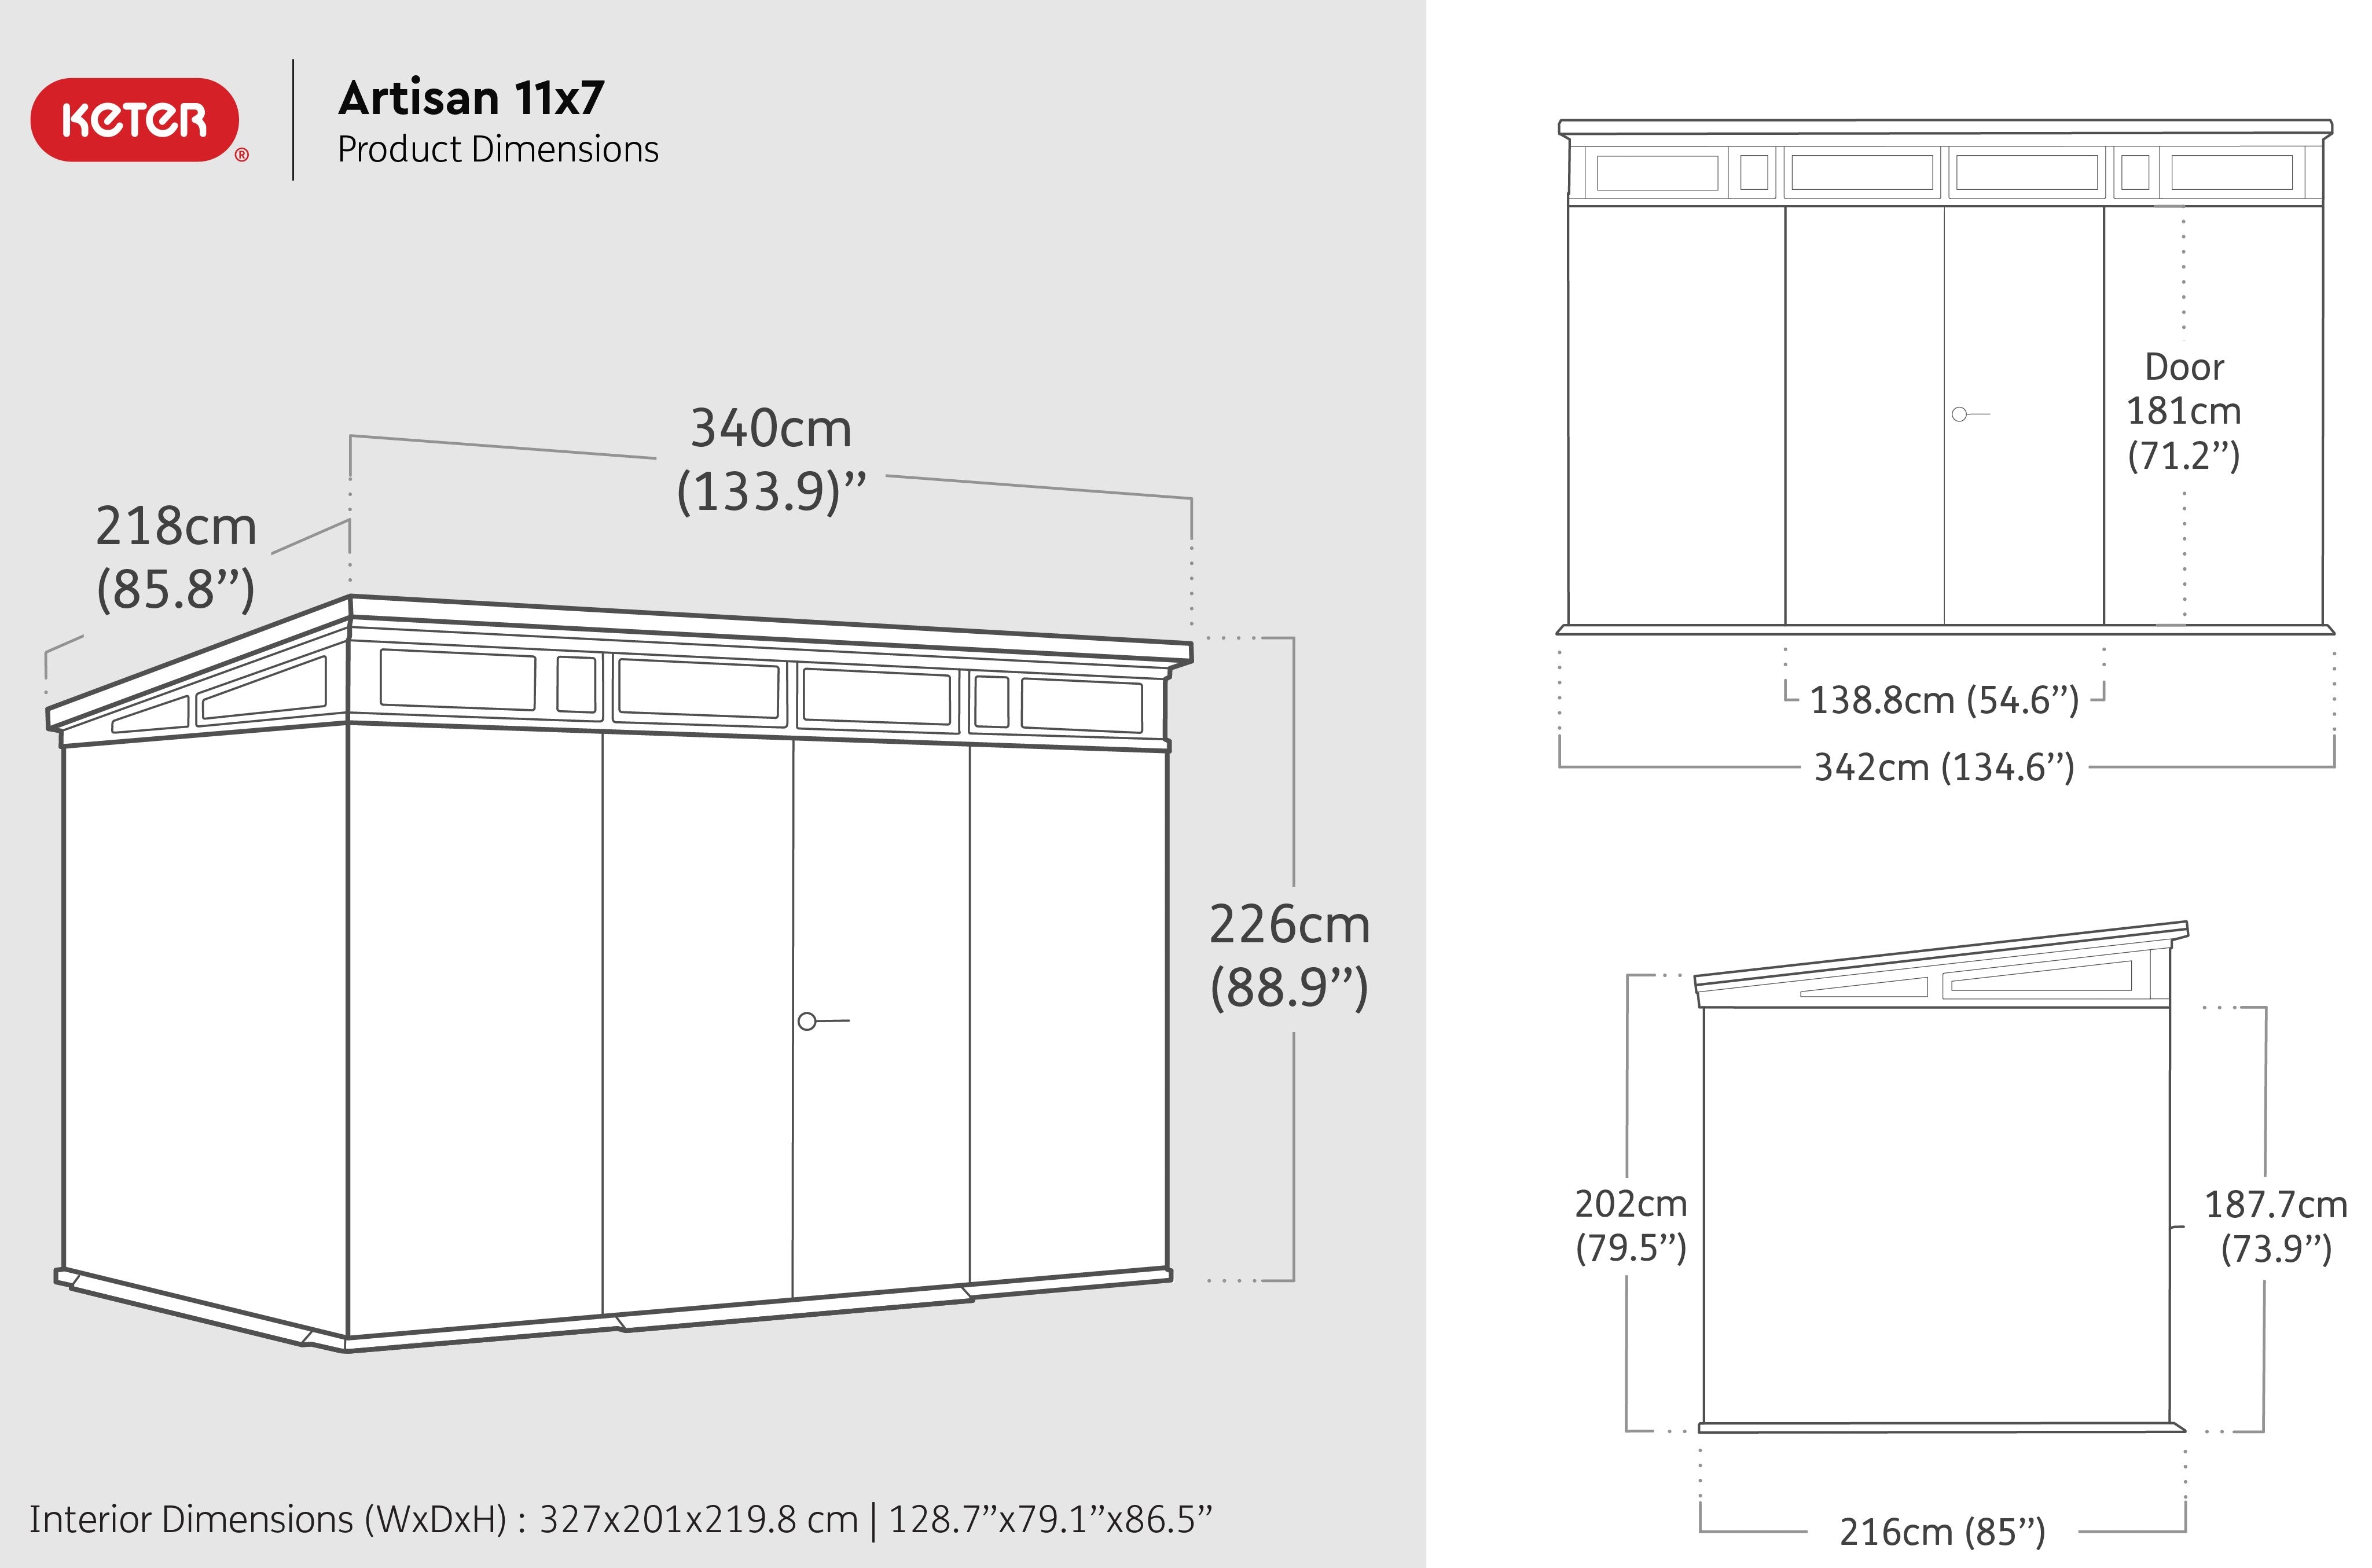 Dimension drawing of the Artisan 11x7 shed